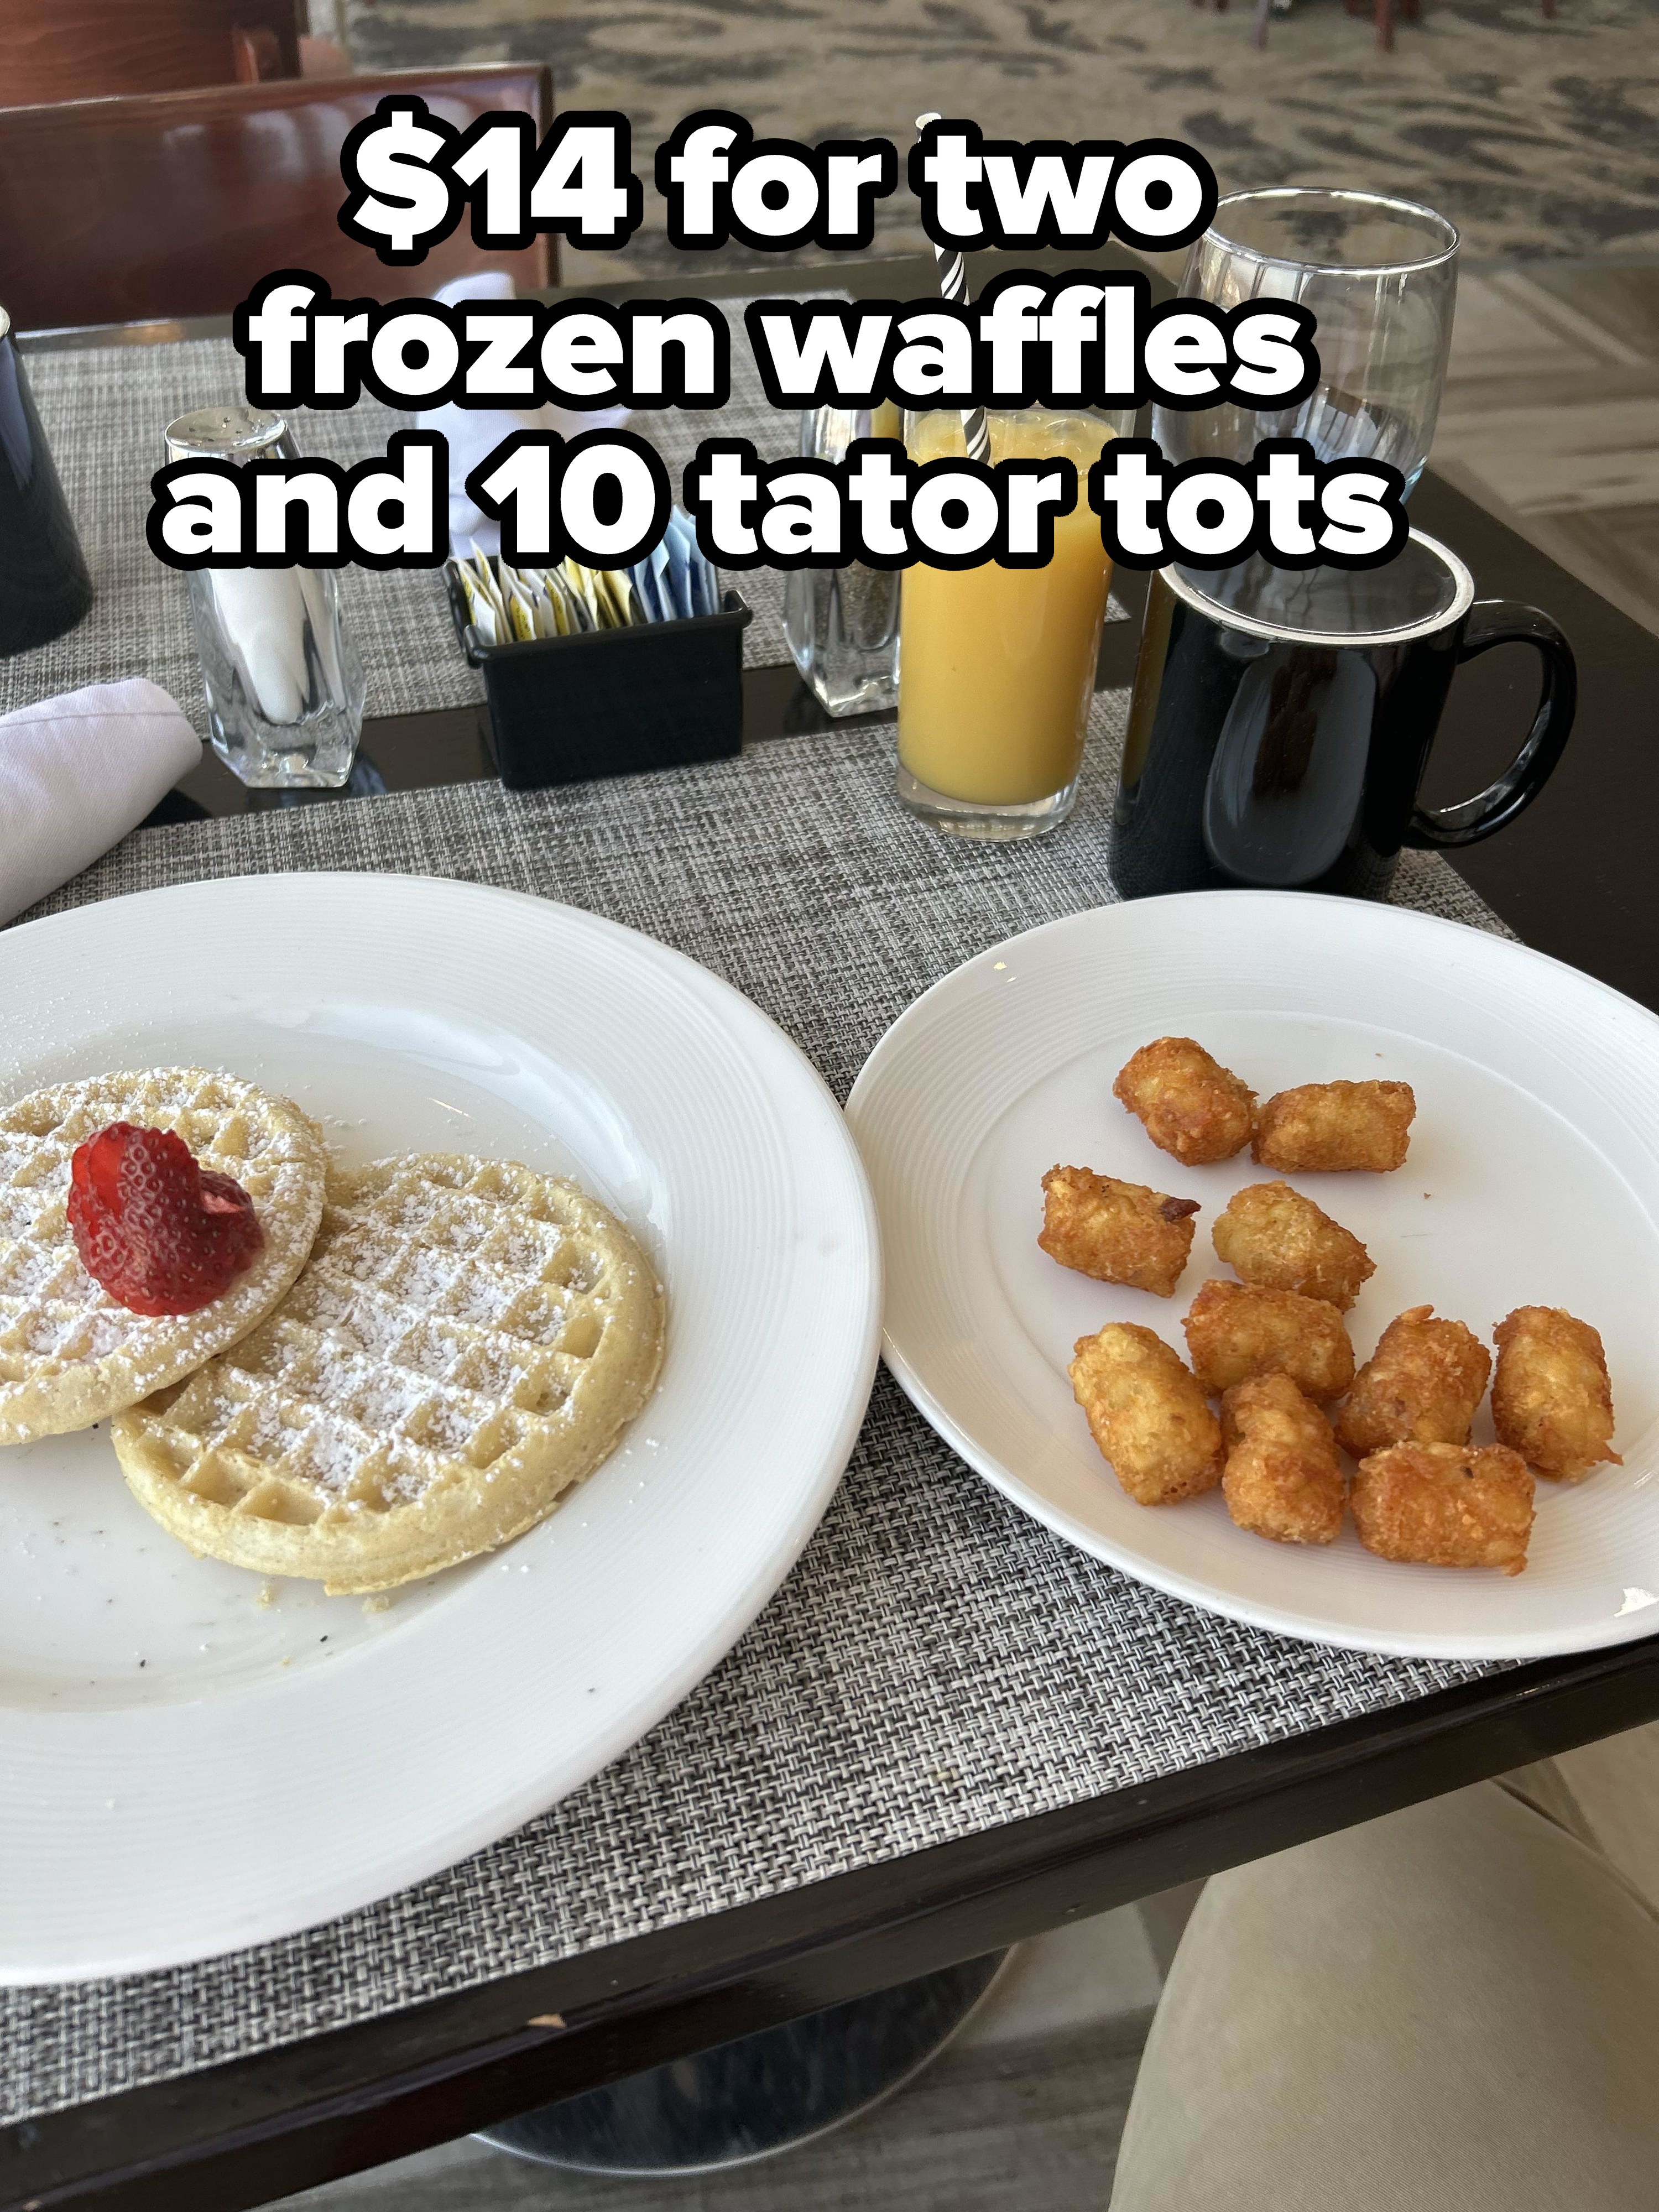 $14 for two frozen waffles and tater tots